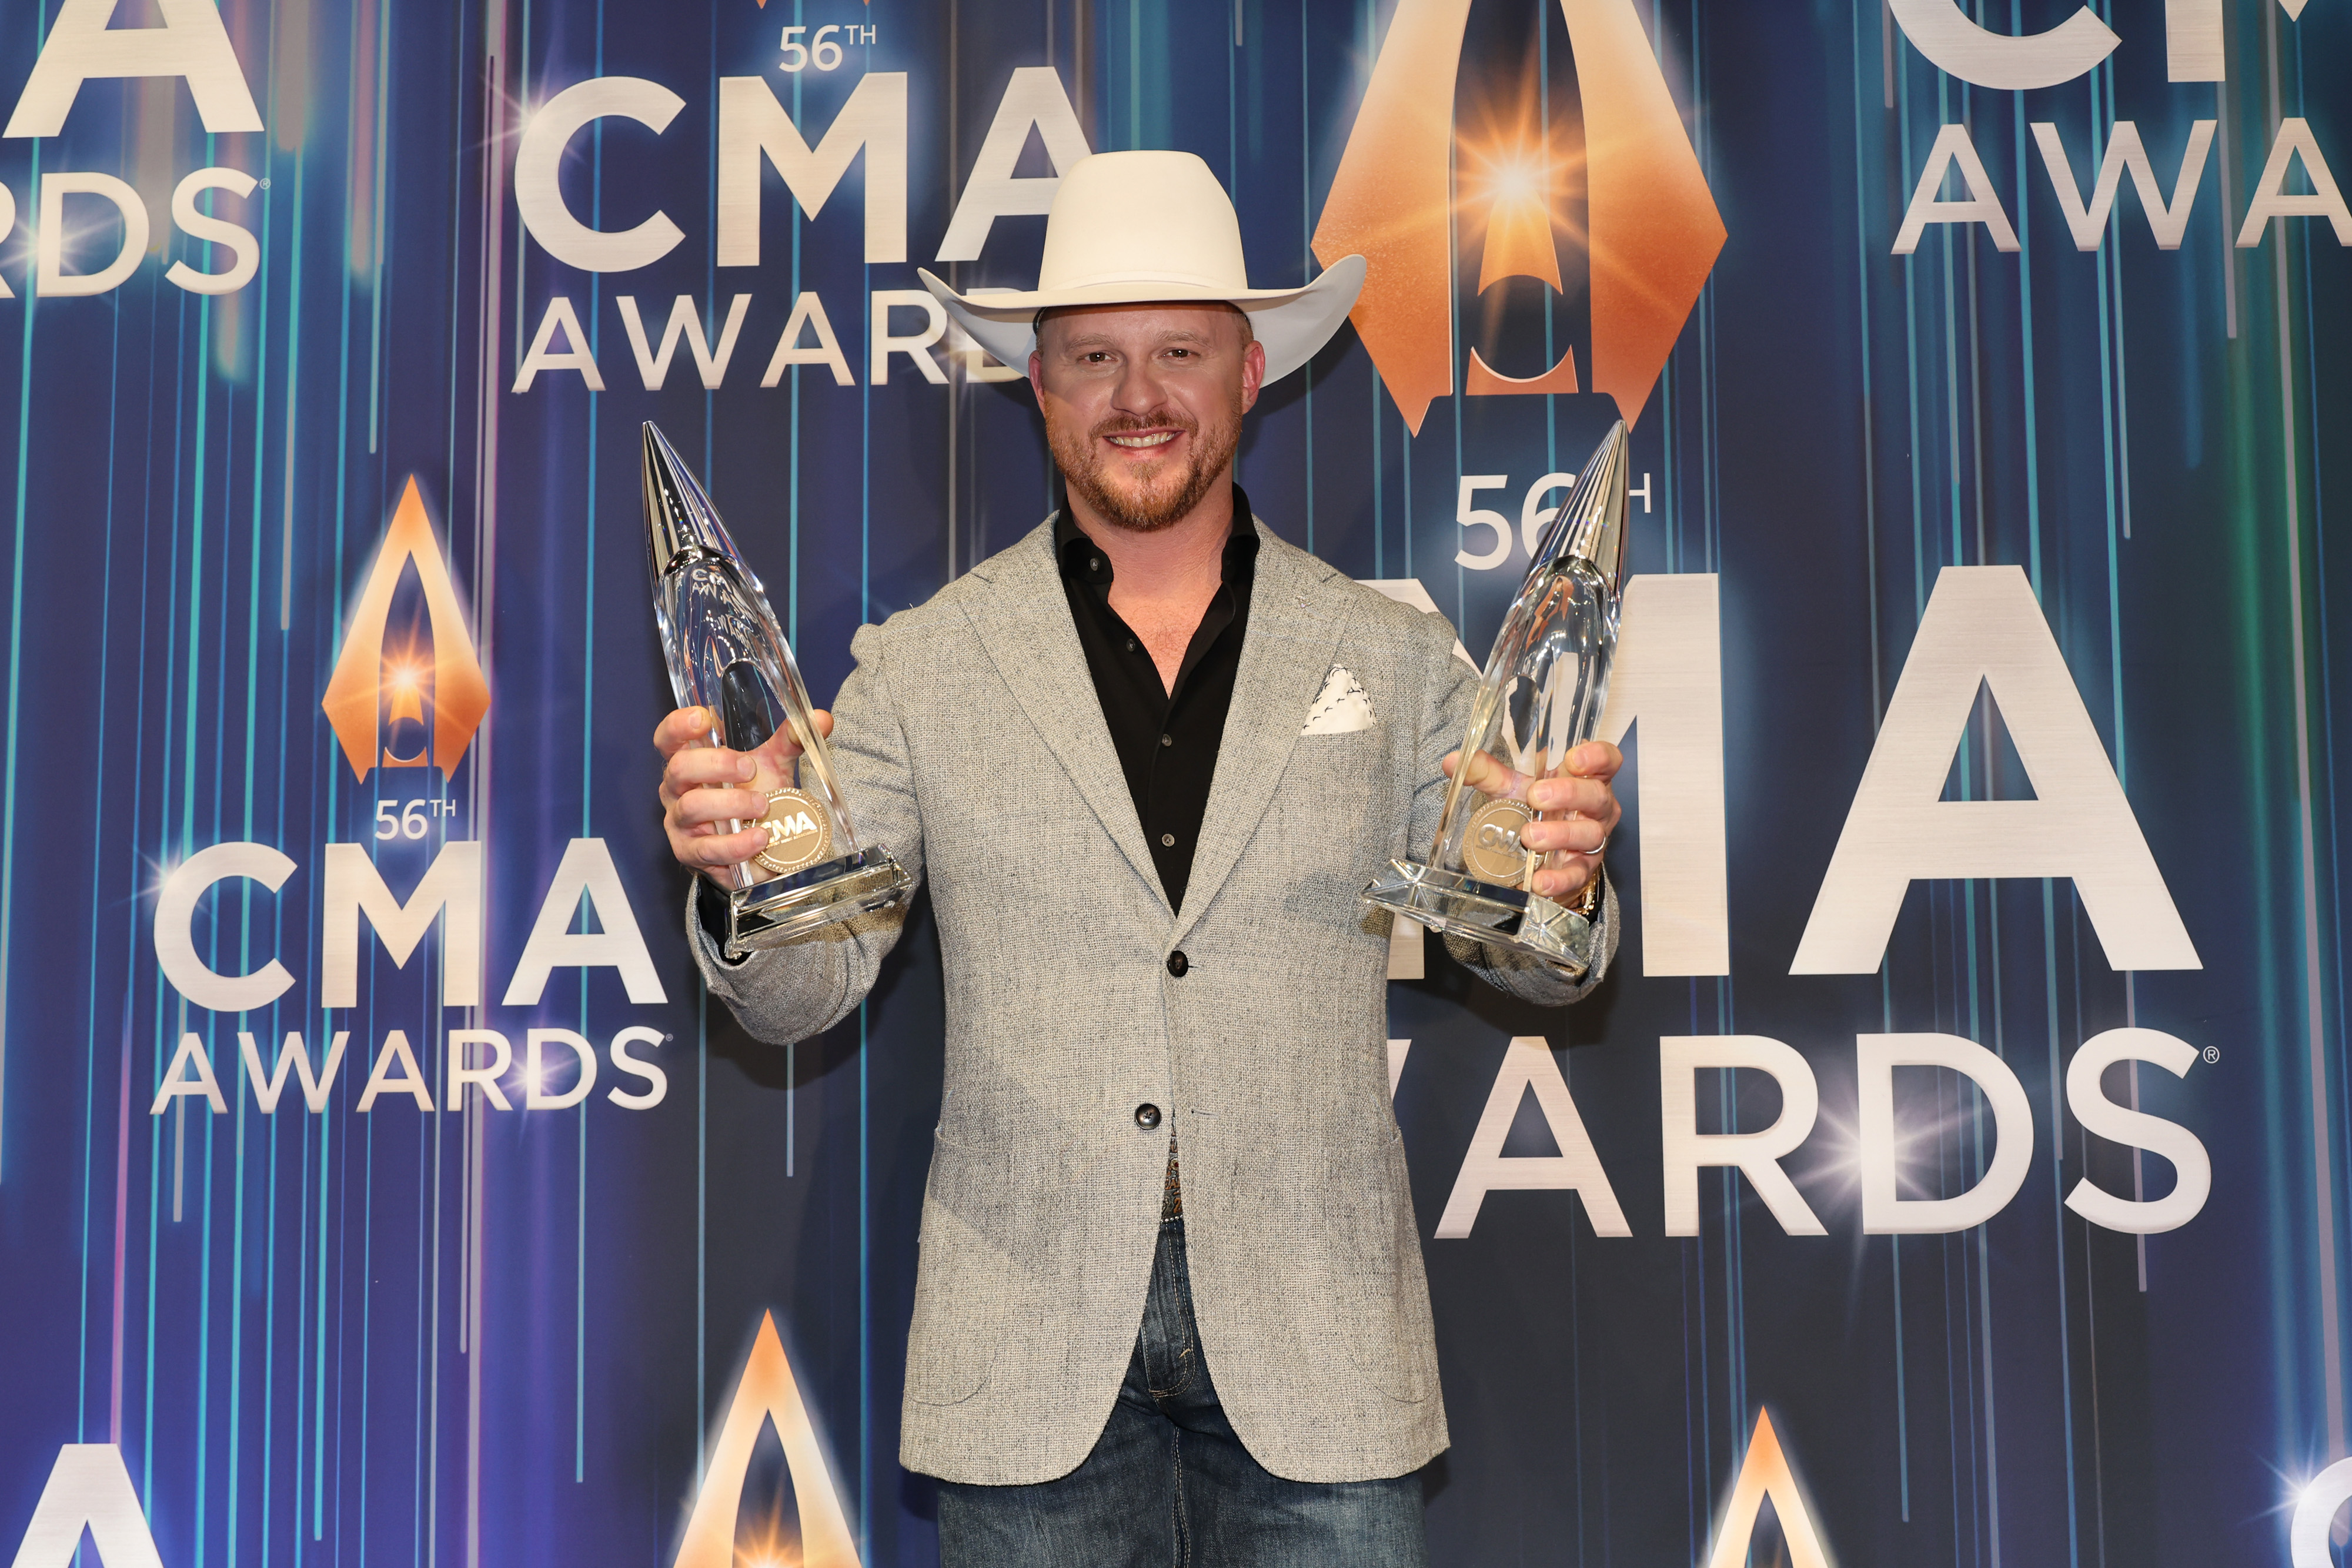 Cody Johnson with the Single of the Year award for “'Til You Can't” he won at the 56th Annual CMA Awards in November 2022, in Nashville, Tennessee. | Source: Getty Images